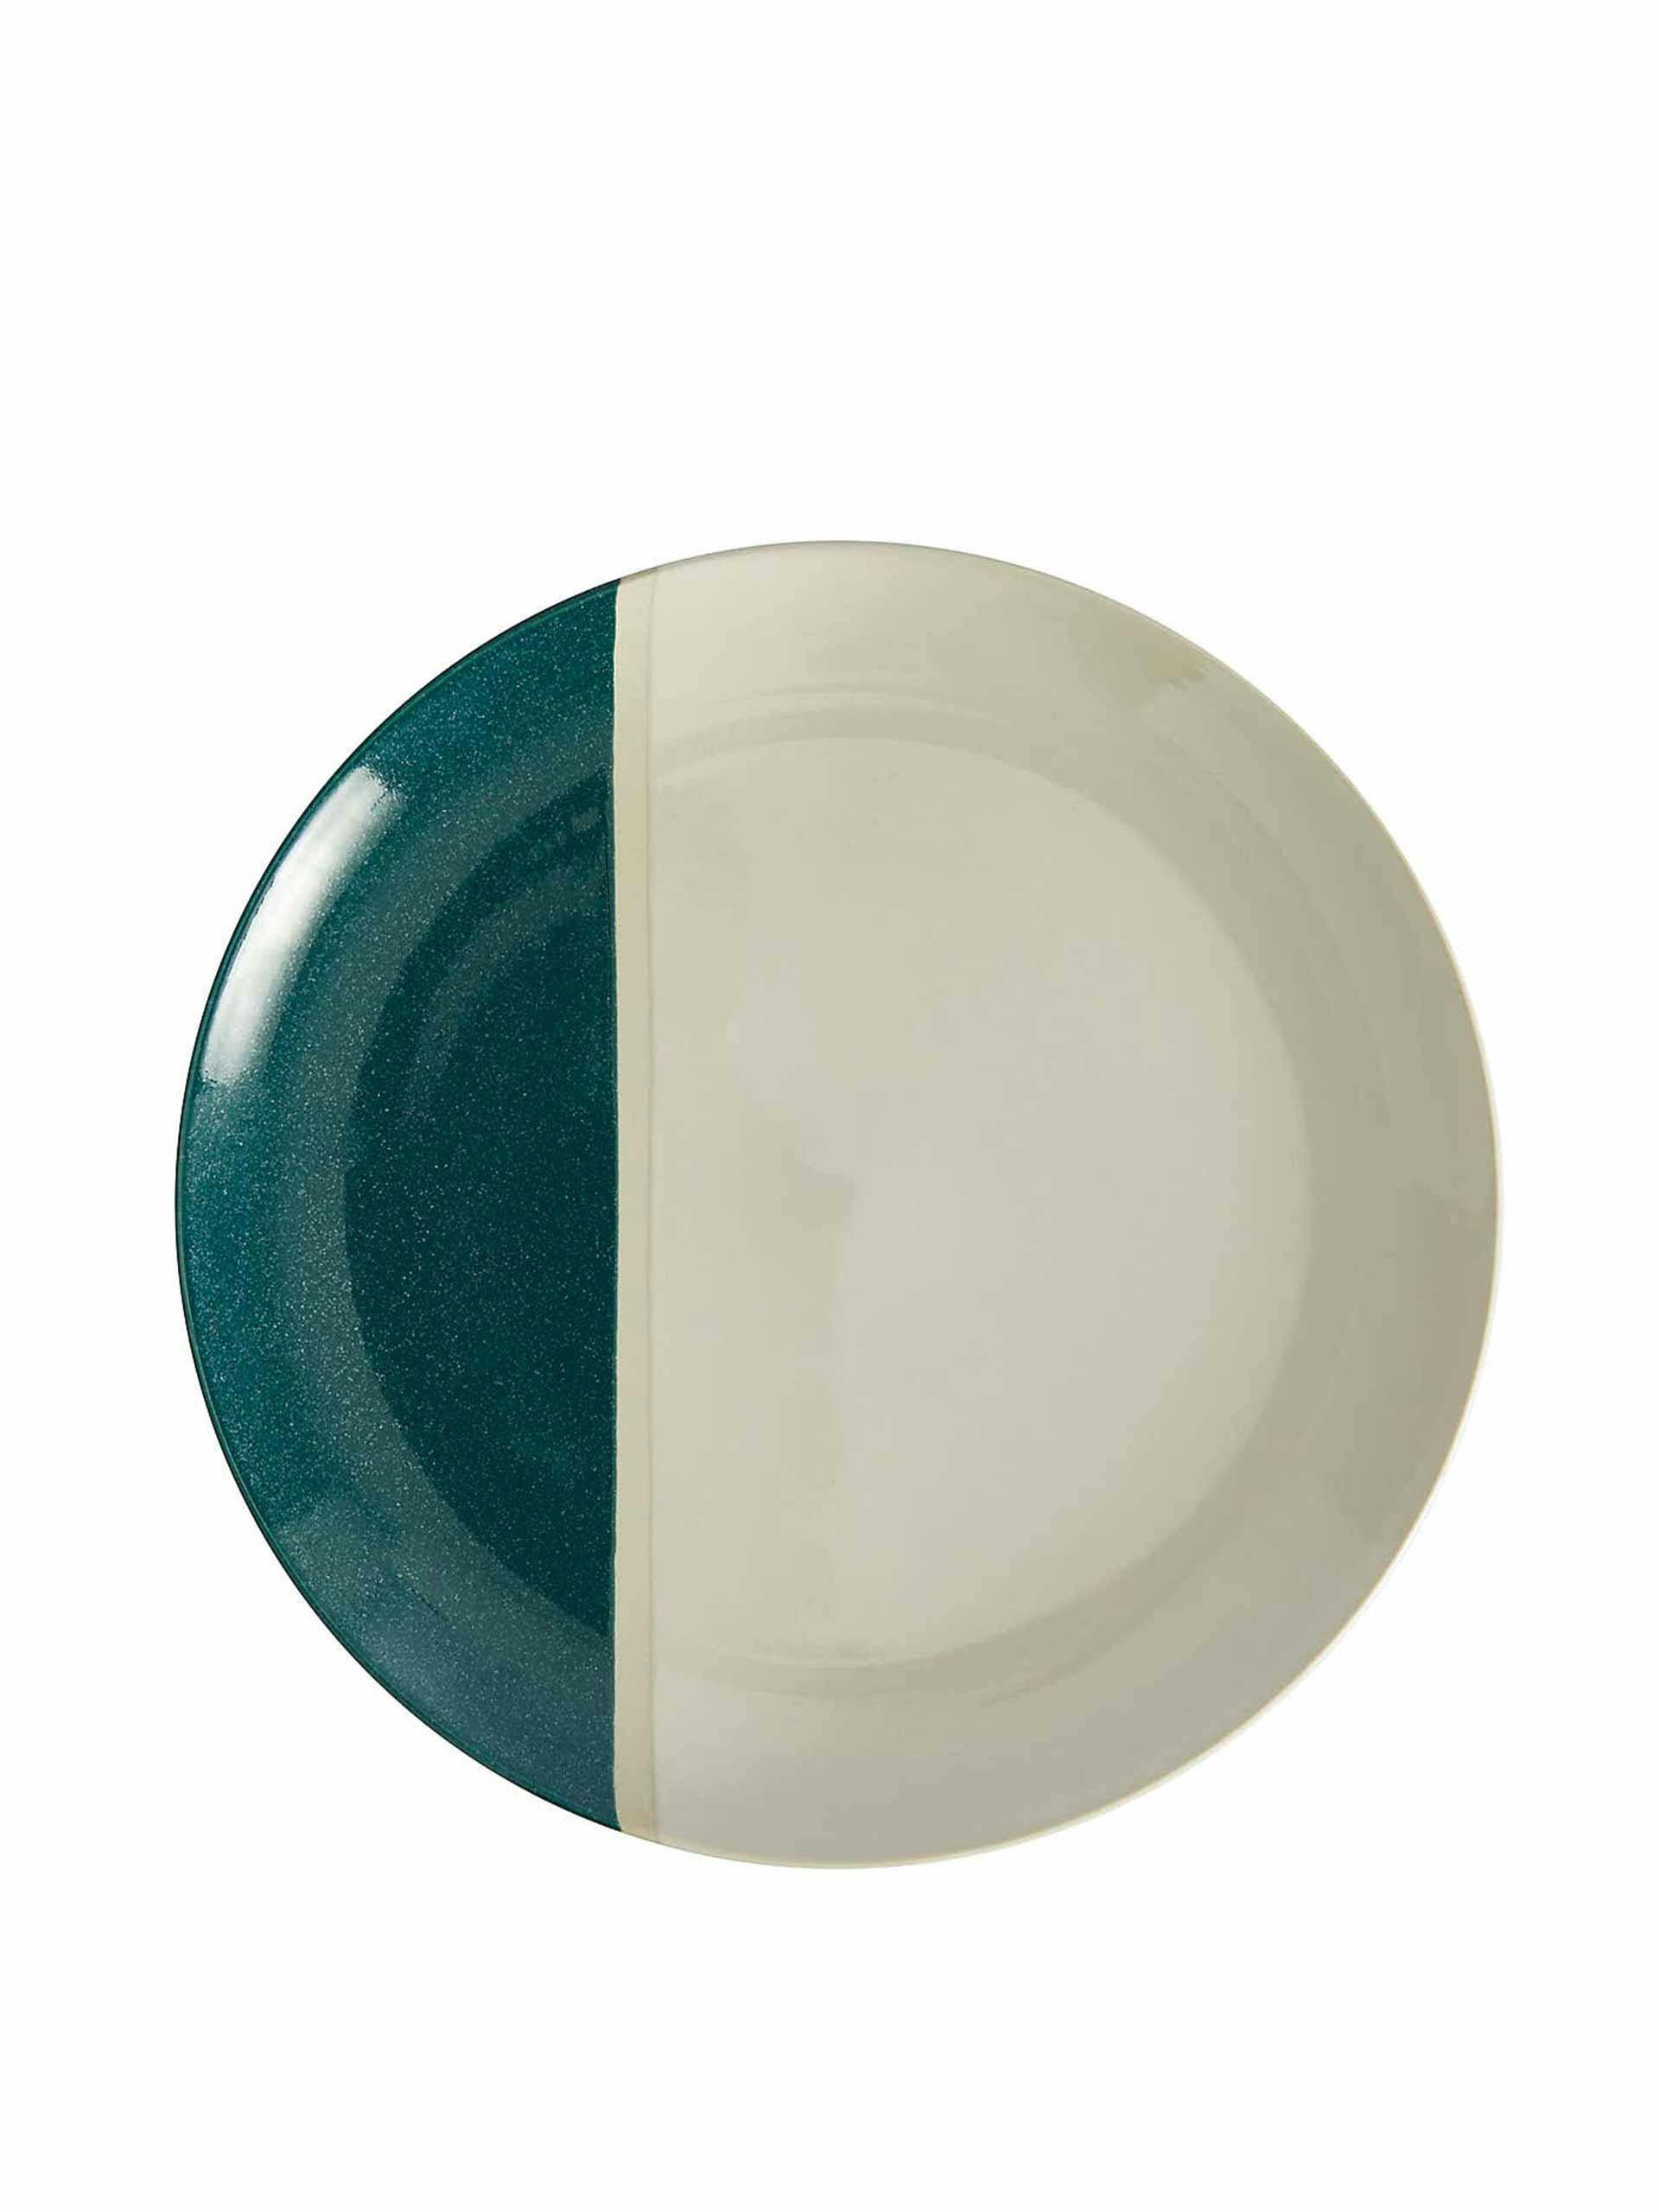 Teal dipped stoneware plate